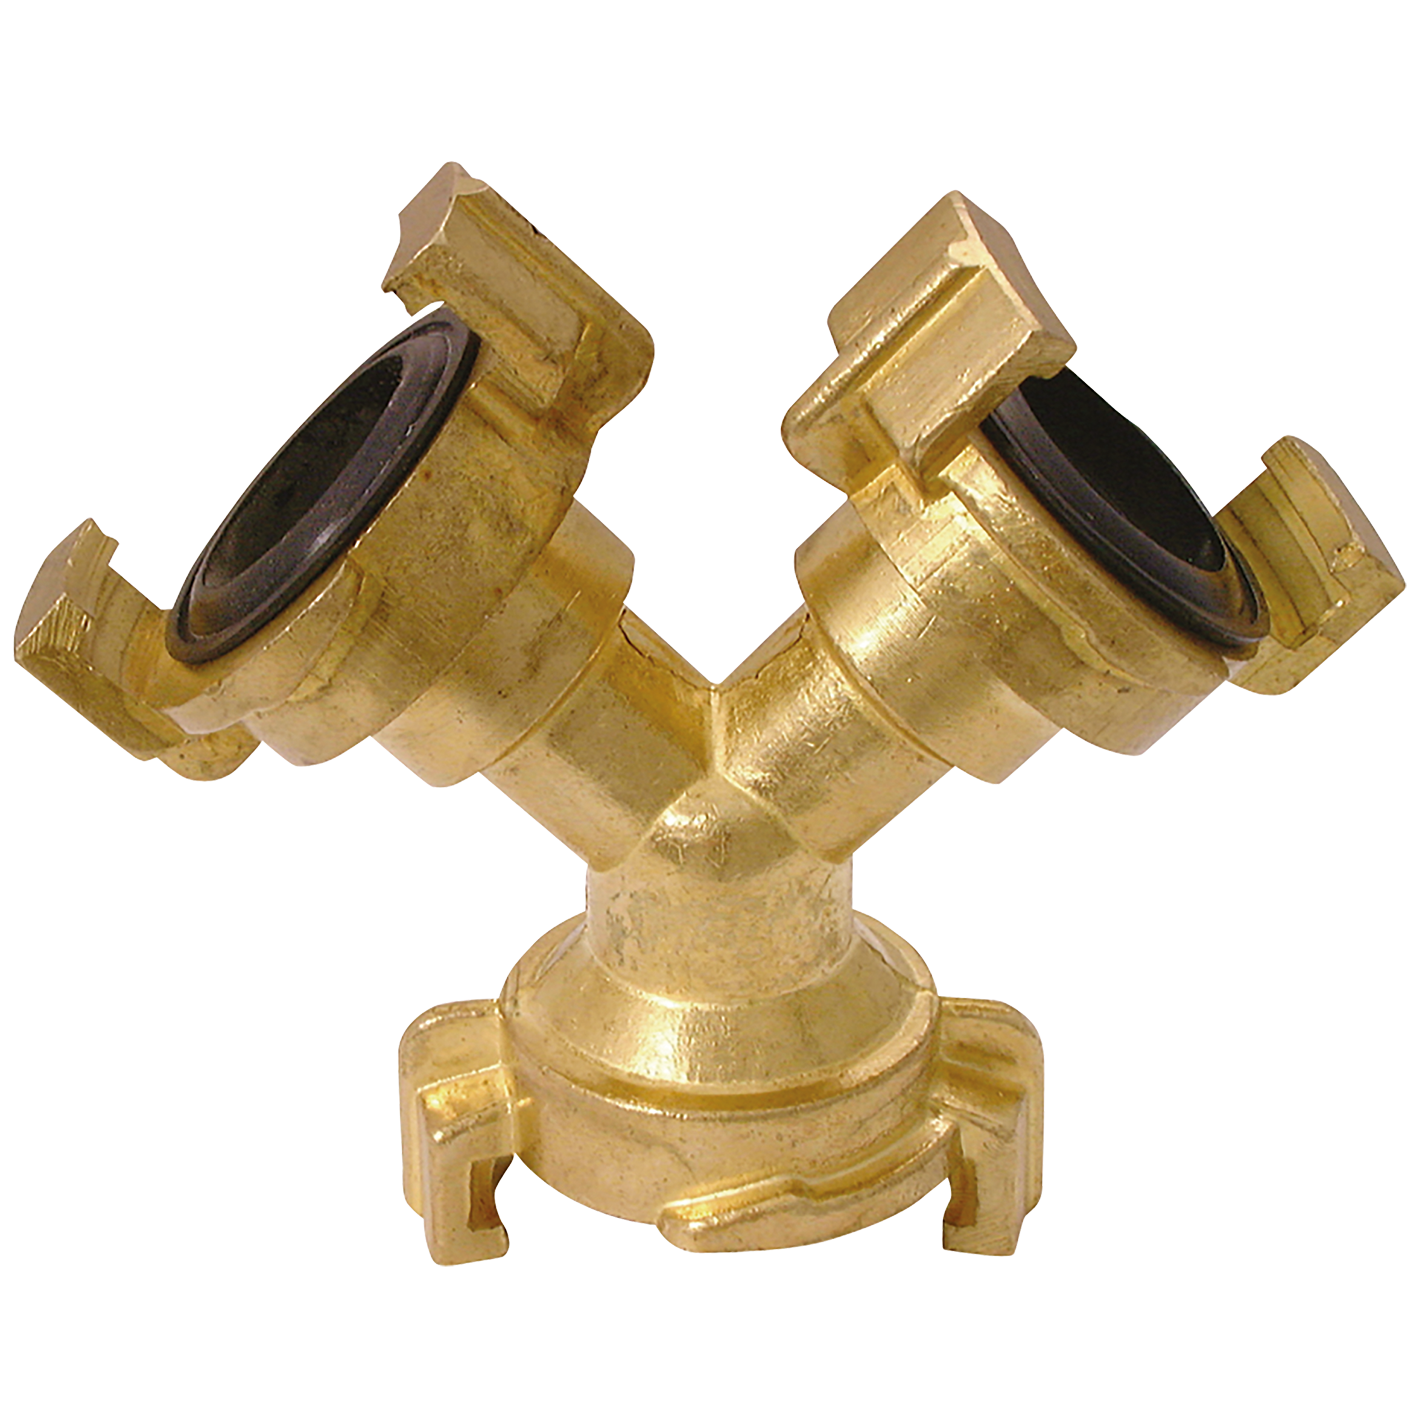 BRASS WATER COUPLING TRIPLE OUTLET